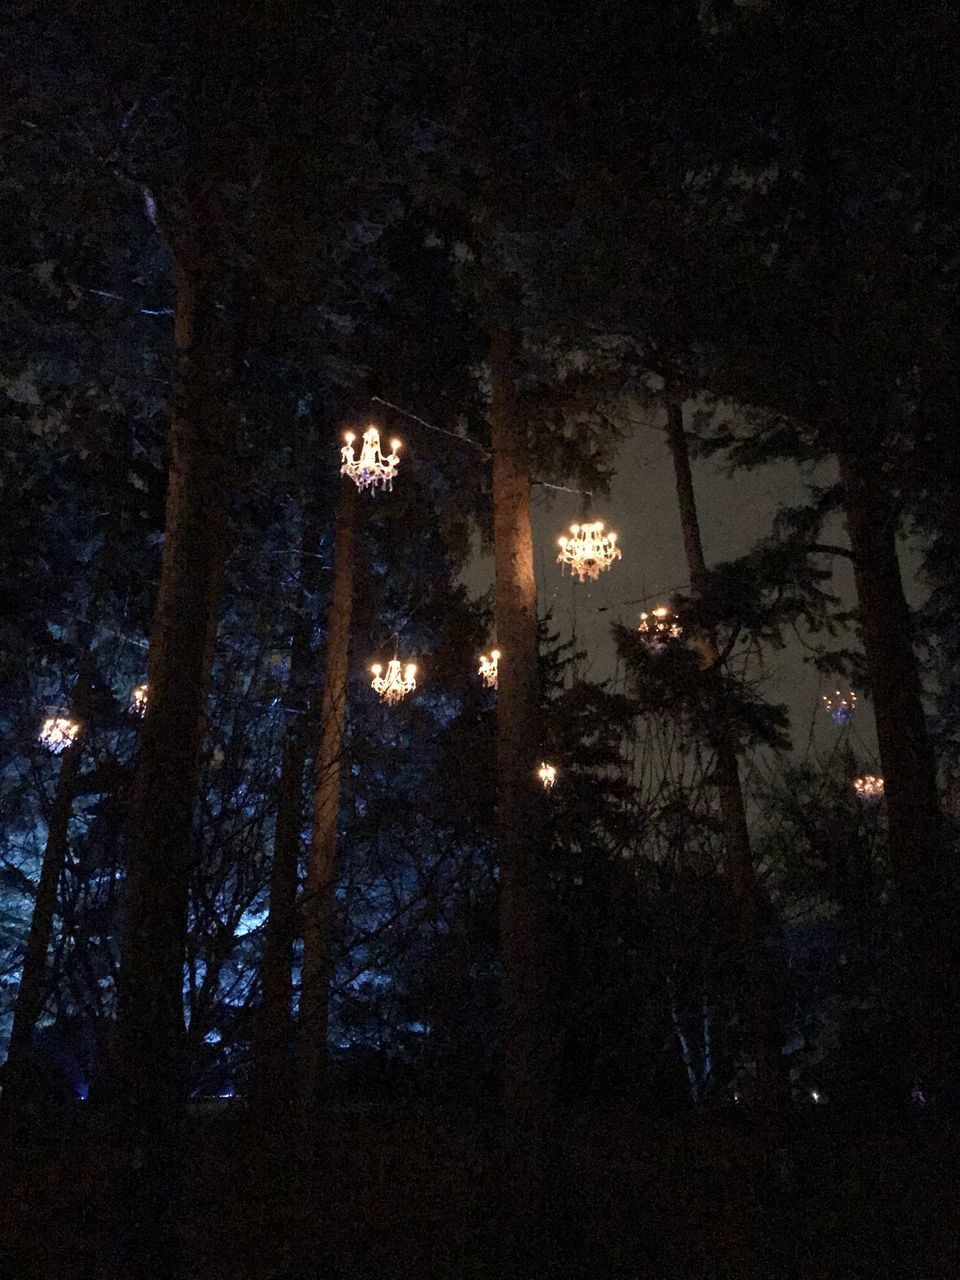 LOW ANGLE VIEW OF ILLUMINATED TREES IN FOREST AT NIGHT